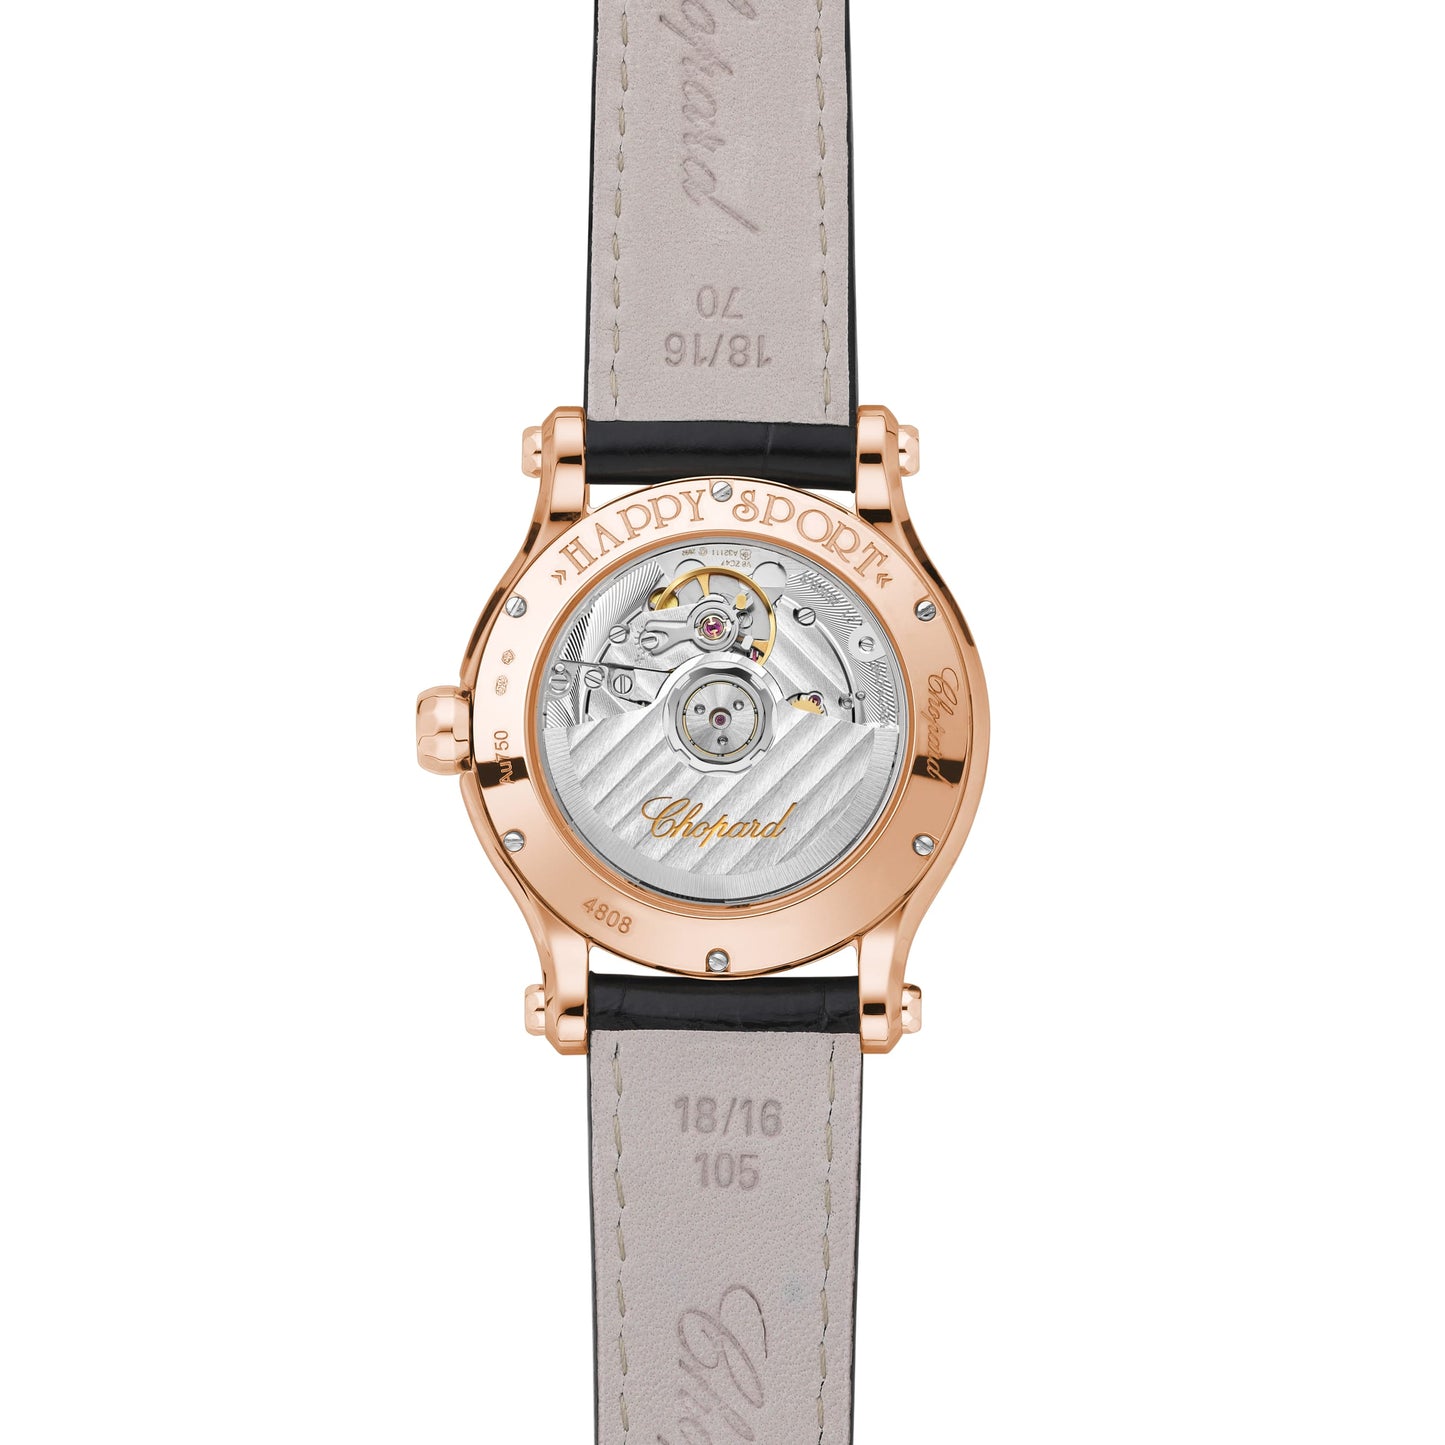 HAPPY SPORT 36 MM, AUTOMATIC, ETHICAL ROSE GOLD, DIAMONDS 274808-5008